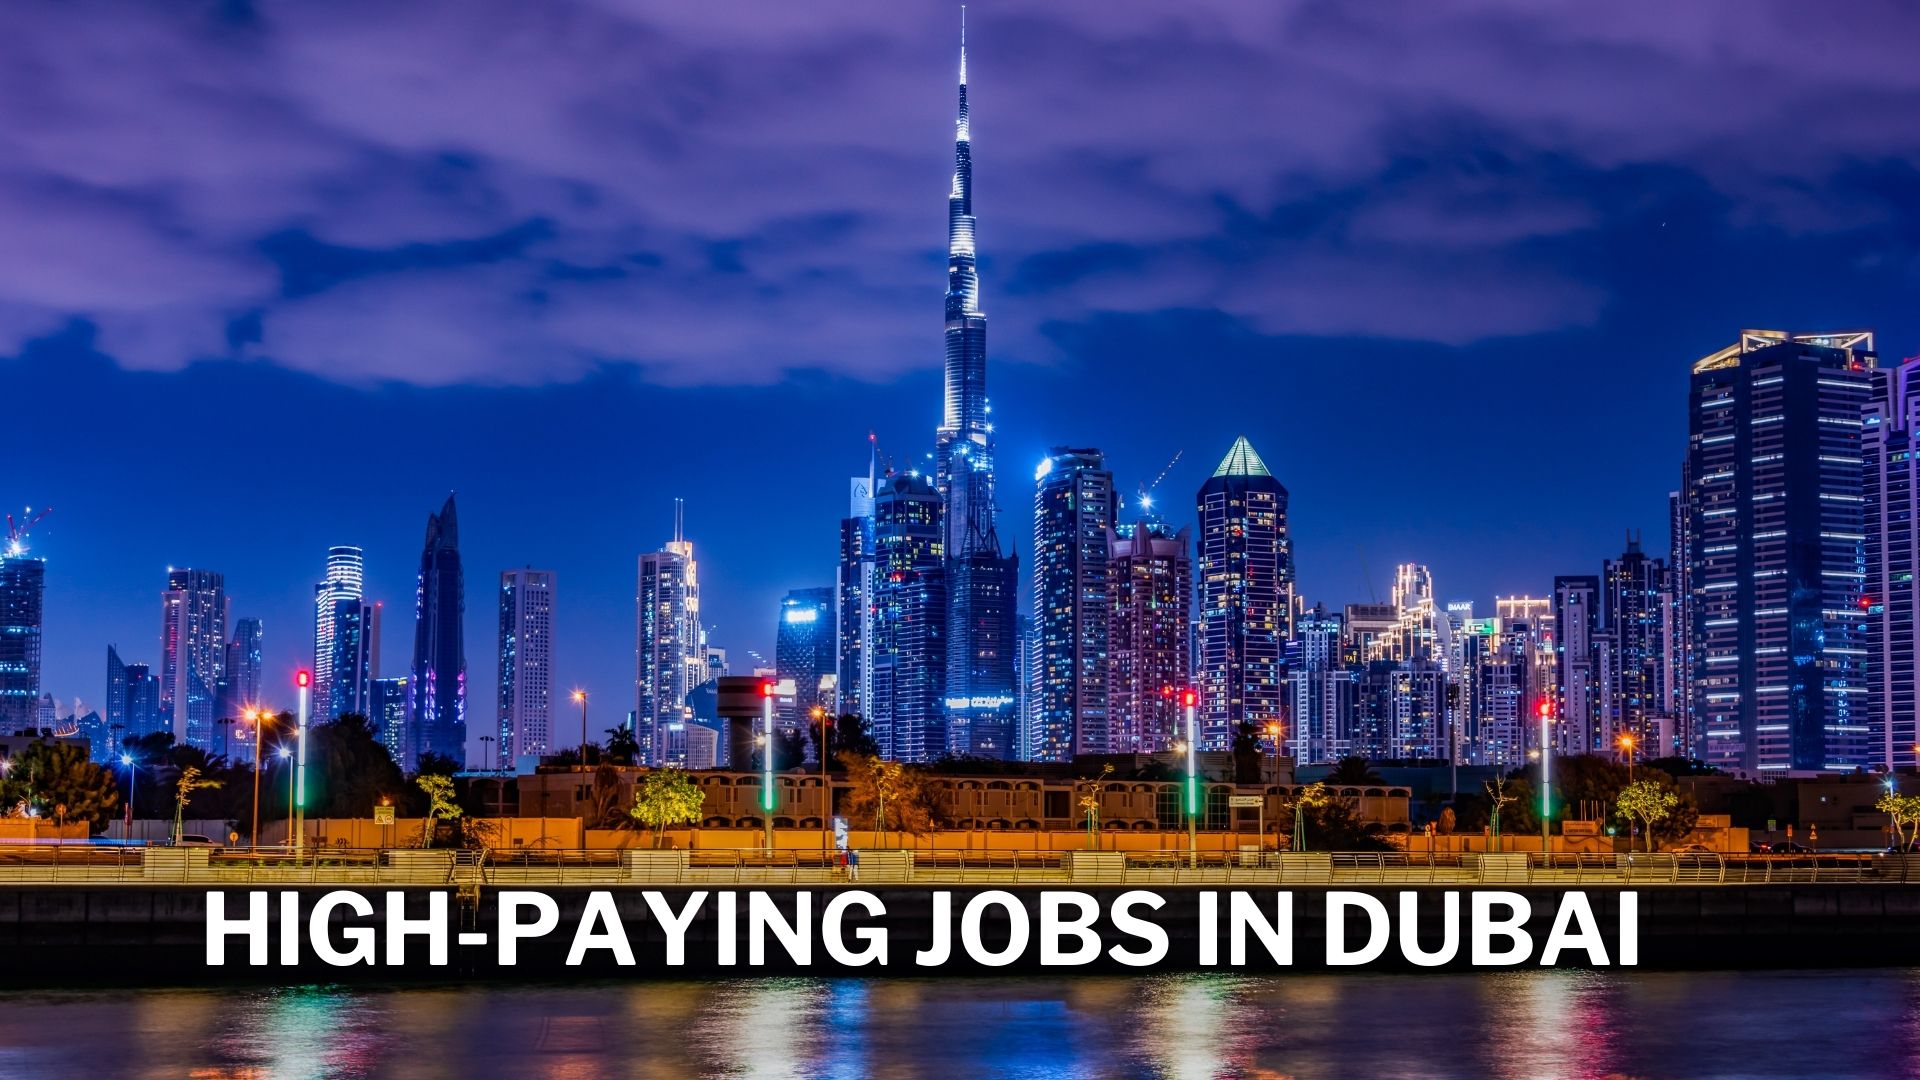 High-Paying Jobs in Dubai: Top 10 Lucrative Careers, Salaries, and Required Skills